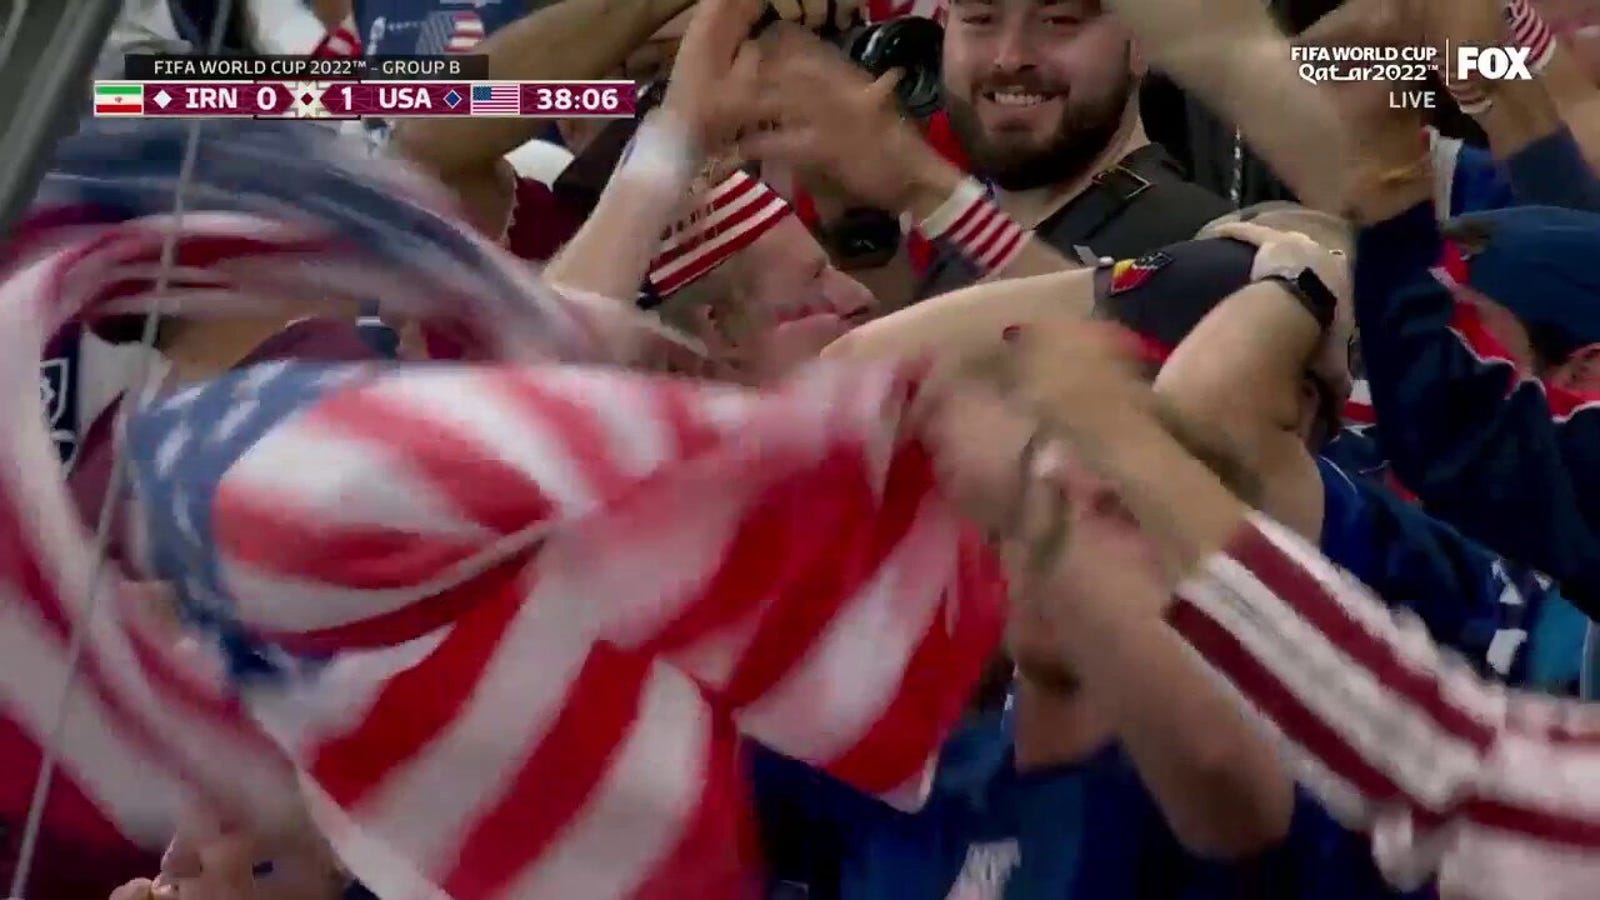 Christian Pulisic of the US scored against Iran in the 38th minute 